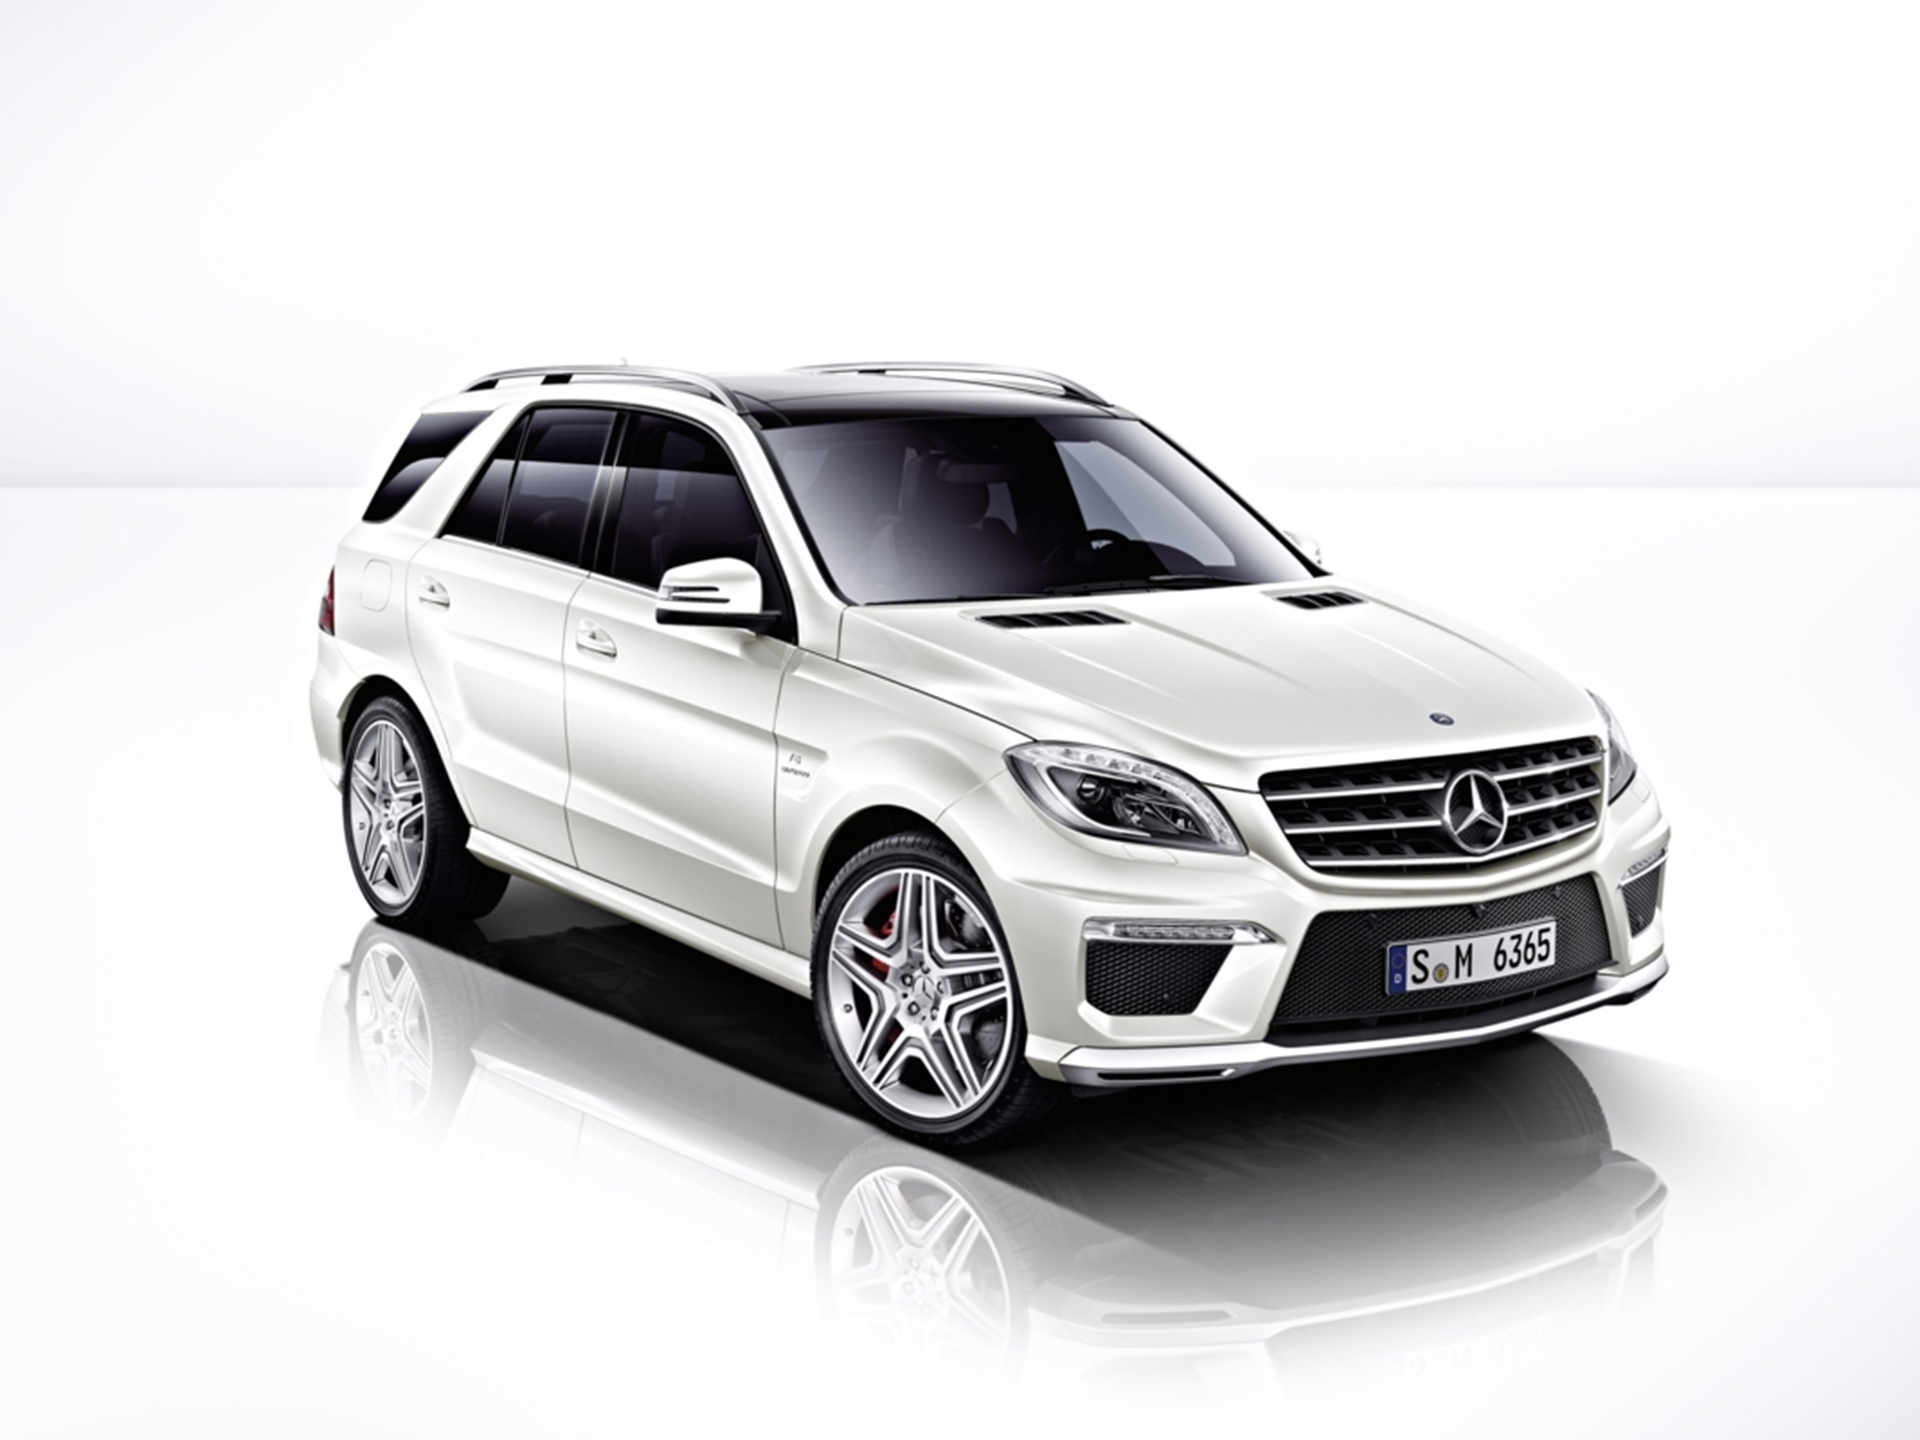 Mercedes-Benz ML 63 AMG Chassis: Effortless superiority whichever route you take